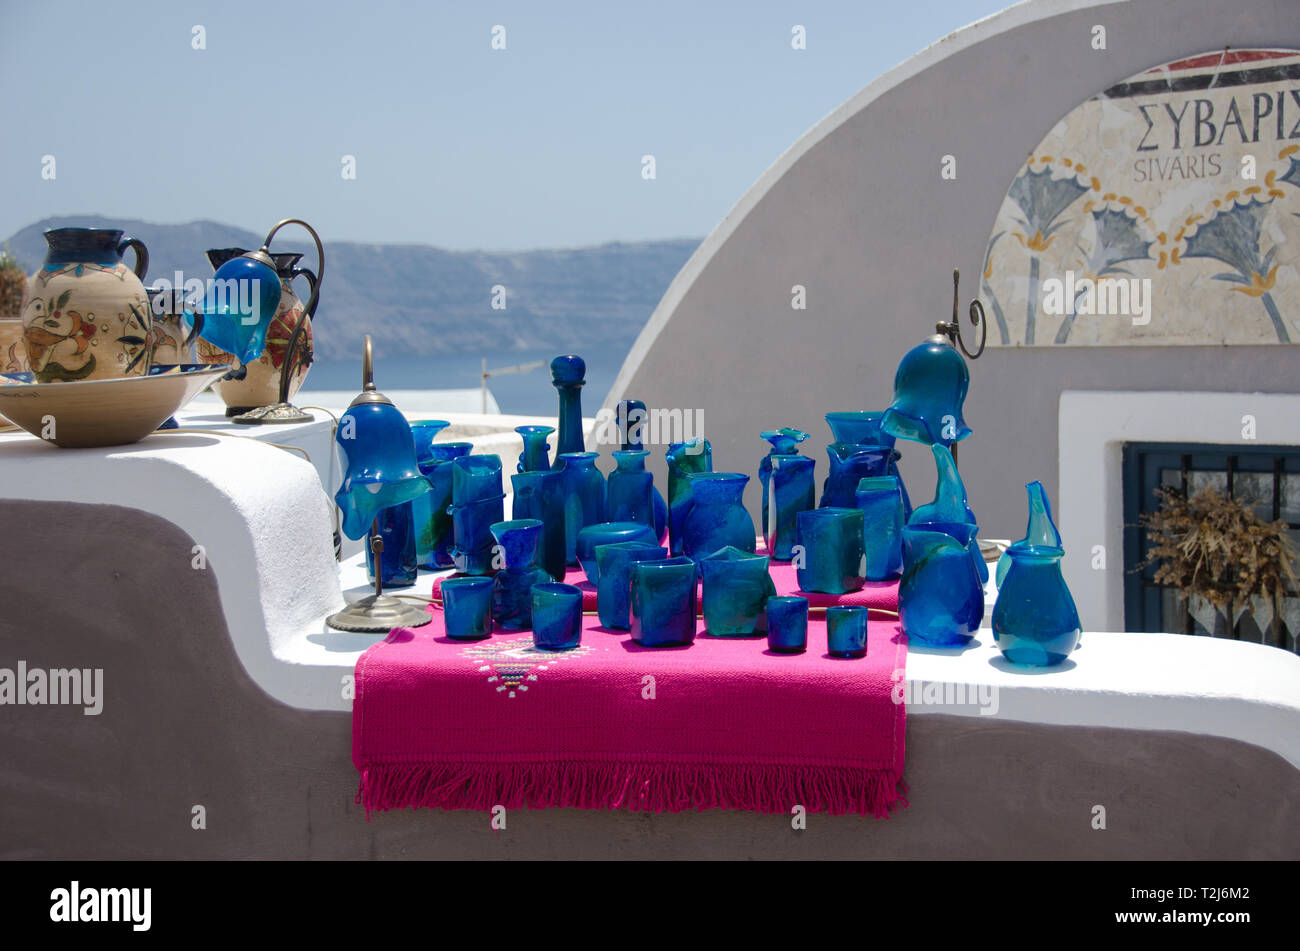 Handmade blue vases on display at a market featuring local artists in Santorini, Greece. Stock Photo